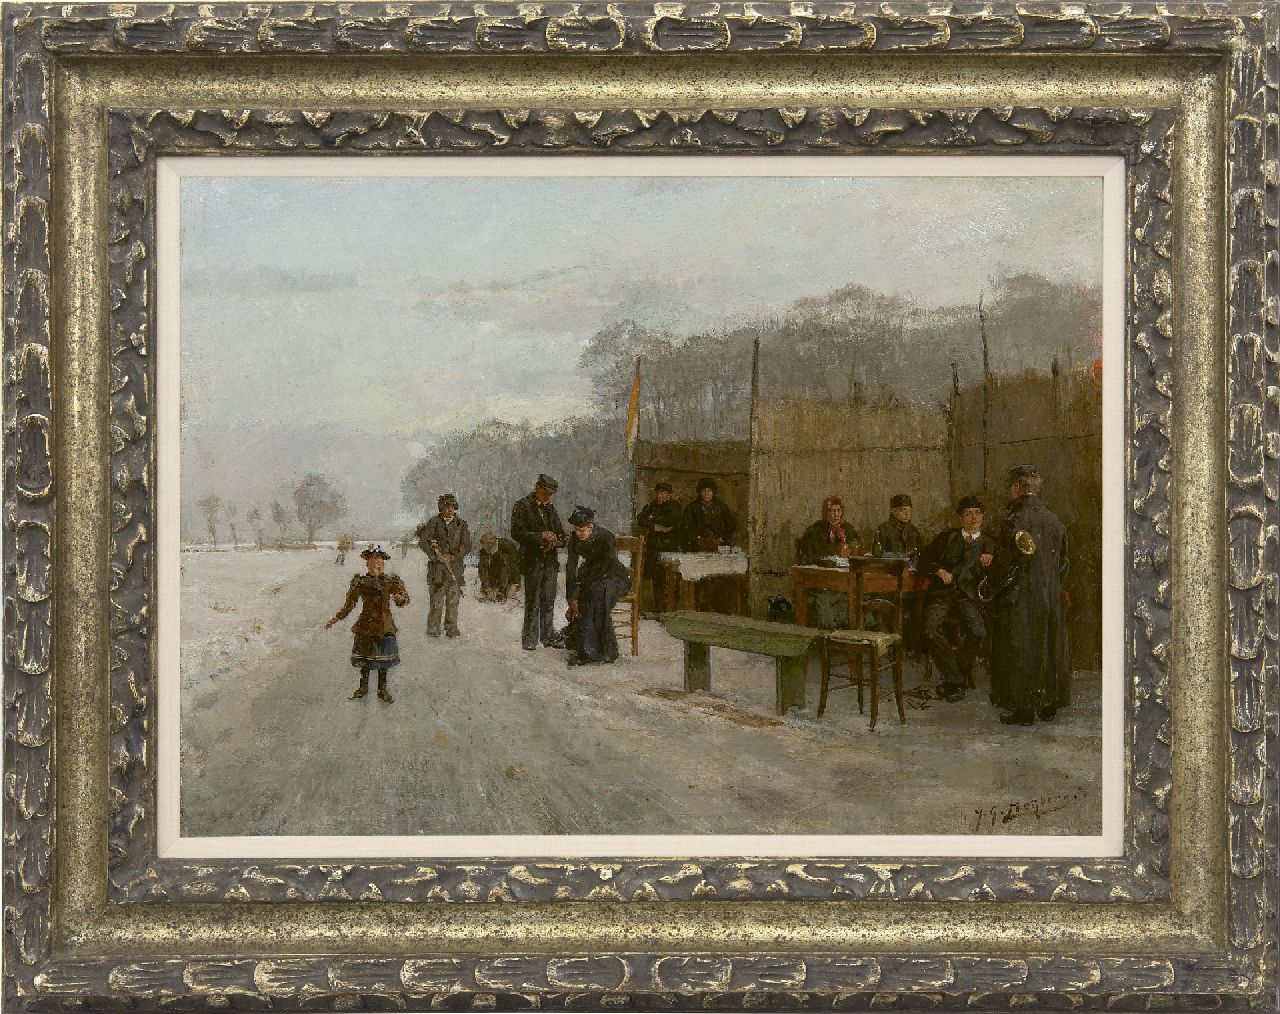 Heijberg J.G.  | Johannes Gerardus Heijberg | Paintings offered for sale | Gathering on the ice, oil on canvas 35.0 x 48.4 cm, signed l.r.